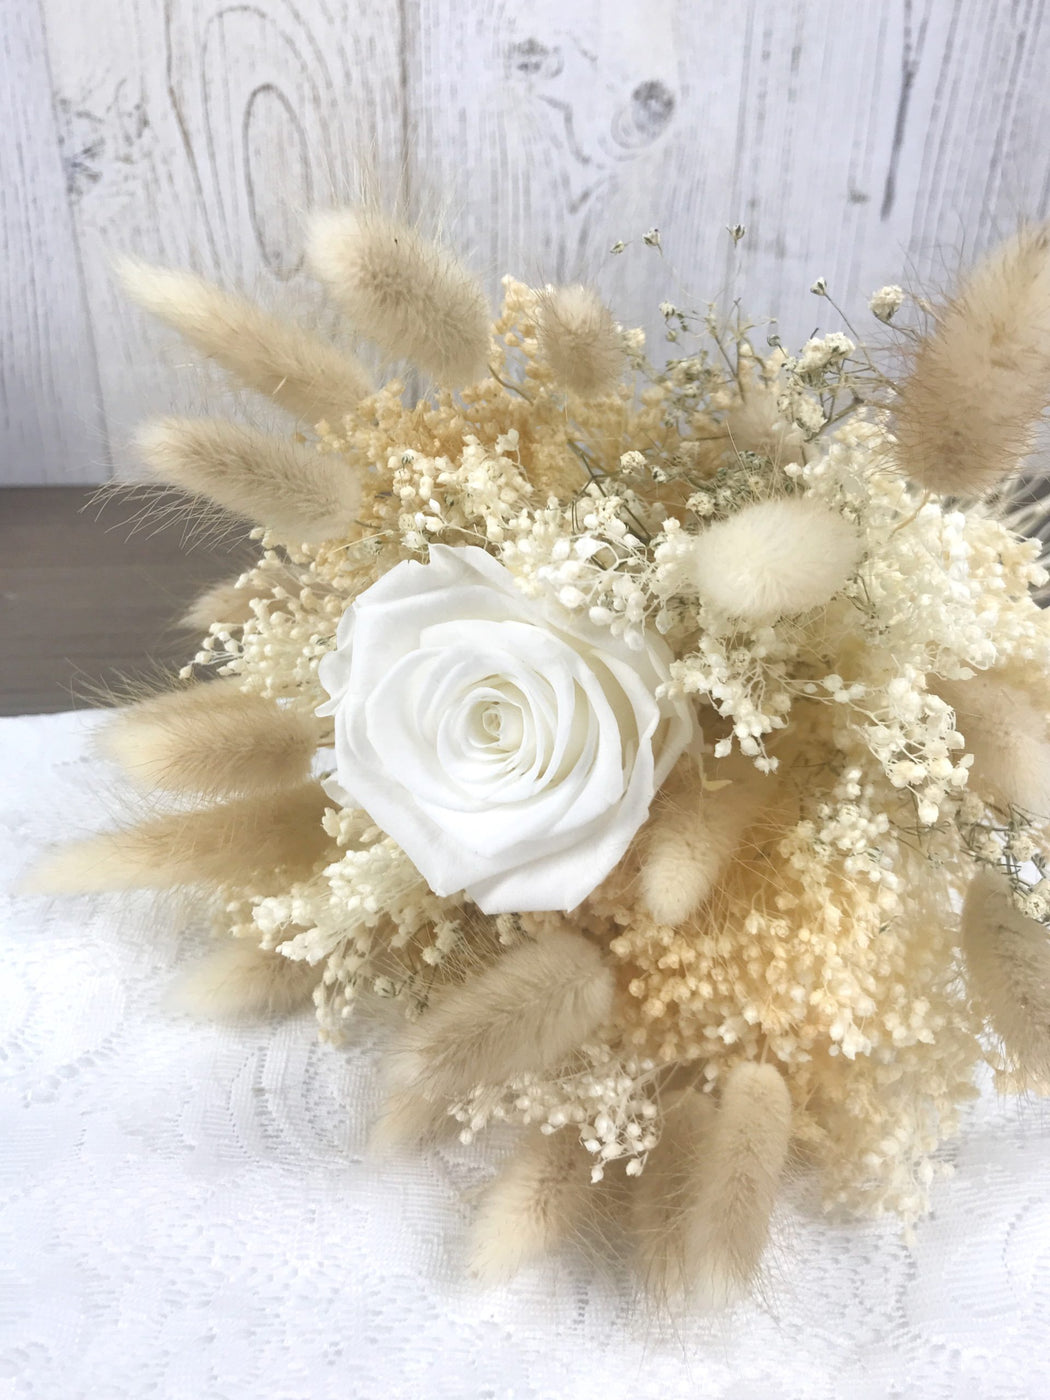 Bouquet of dried flowers with stabilized rose - Bouquet 